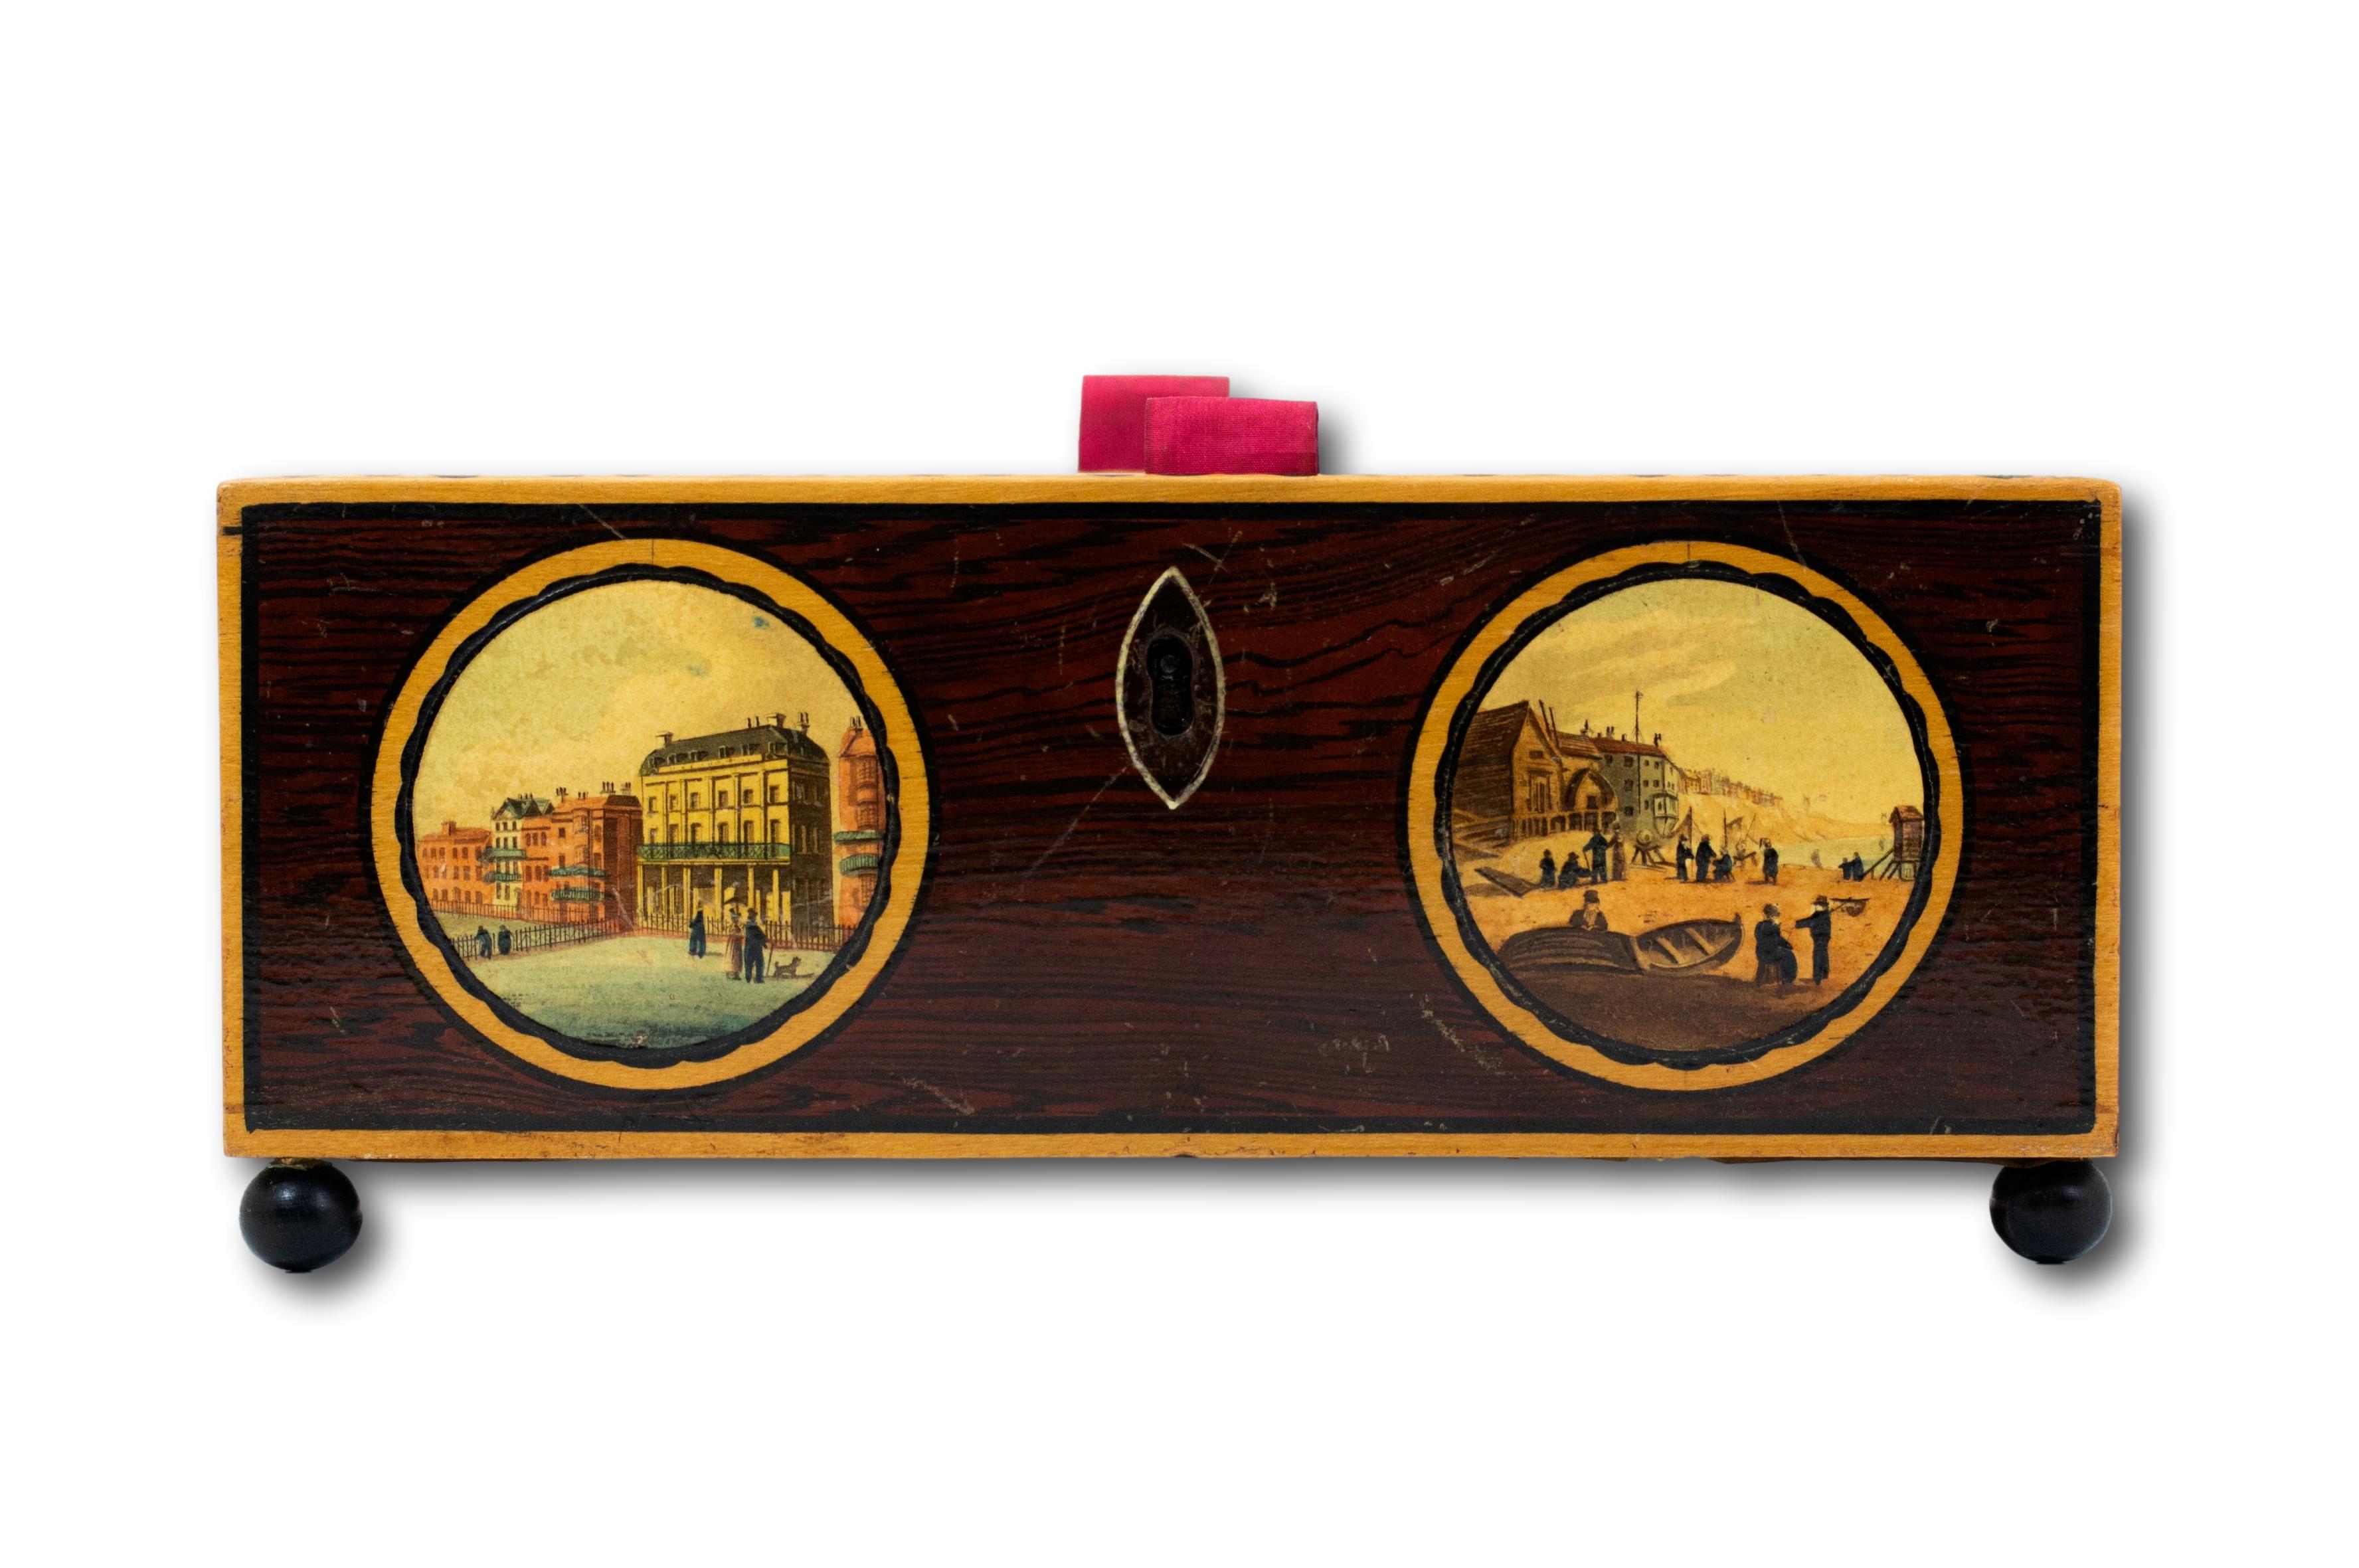 Featuring Multiple Scenes of Brighton

From our Sewing Box collection, we are pleased to offer this Tunbridge ware box. The box of rectangular shape elevated upon four ball feet features several scenes from Brighton including the Pavillions and the